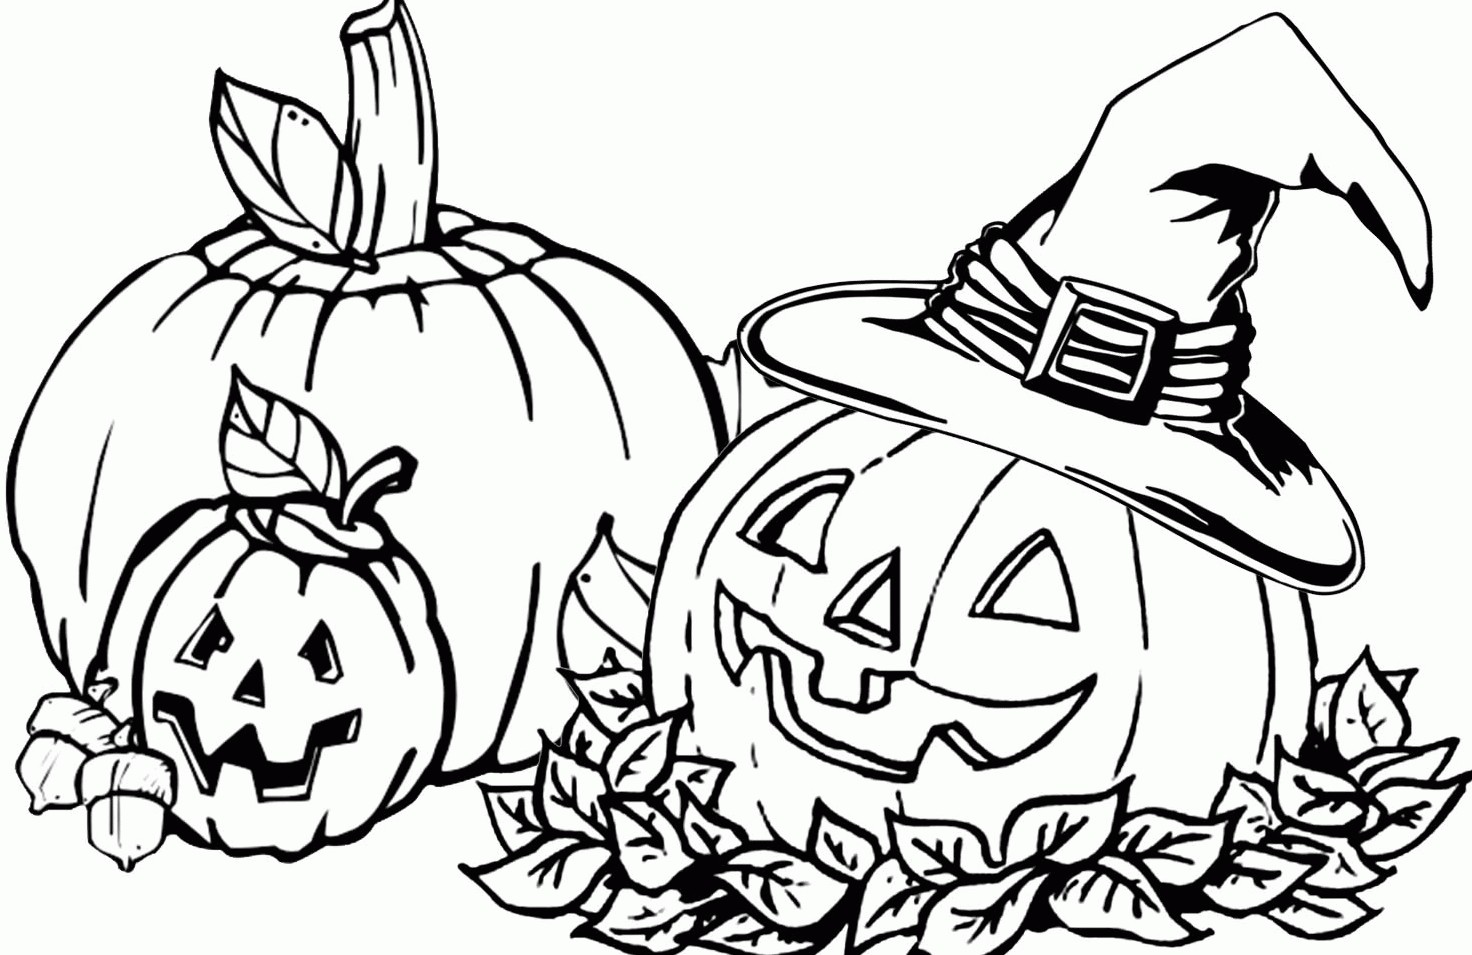 free-pumpkin-patch-coloring-pages-printable-download-free-clip-art